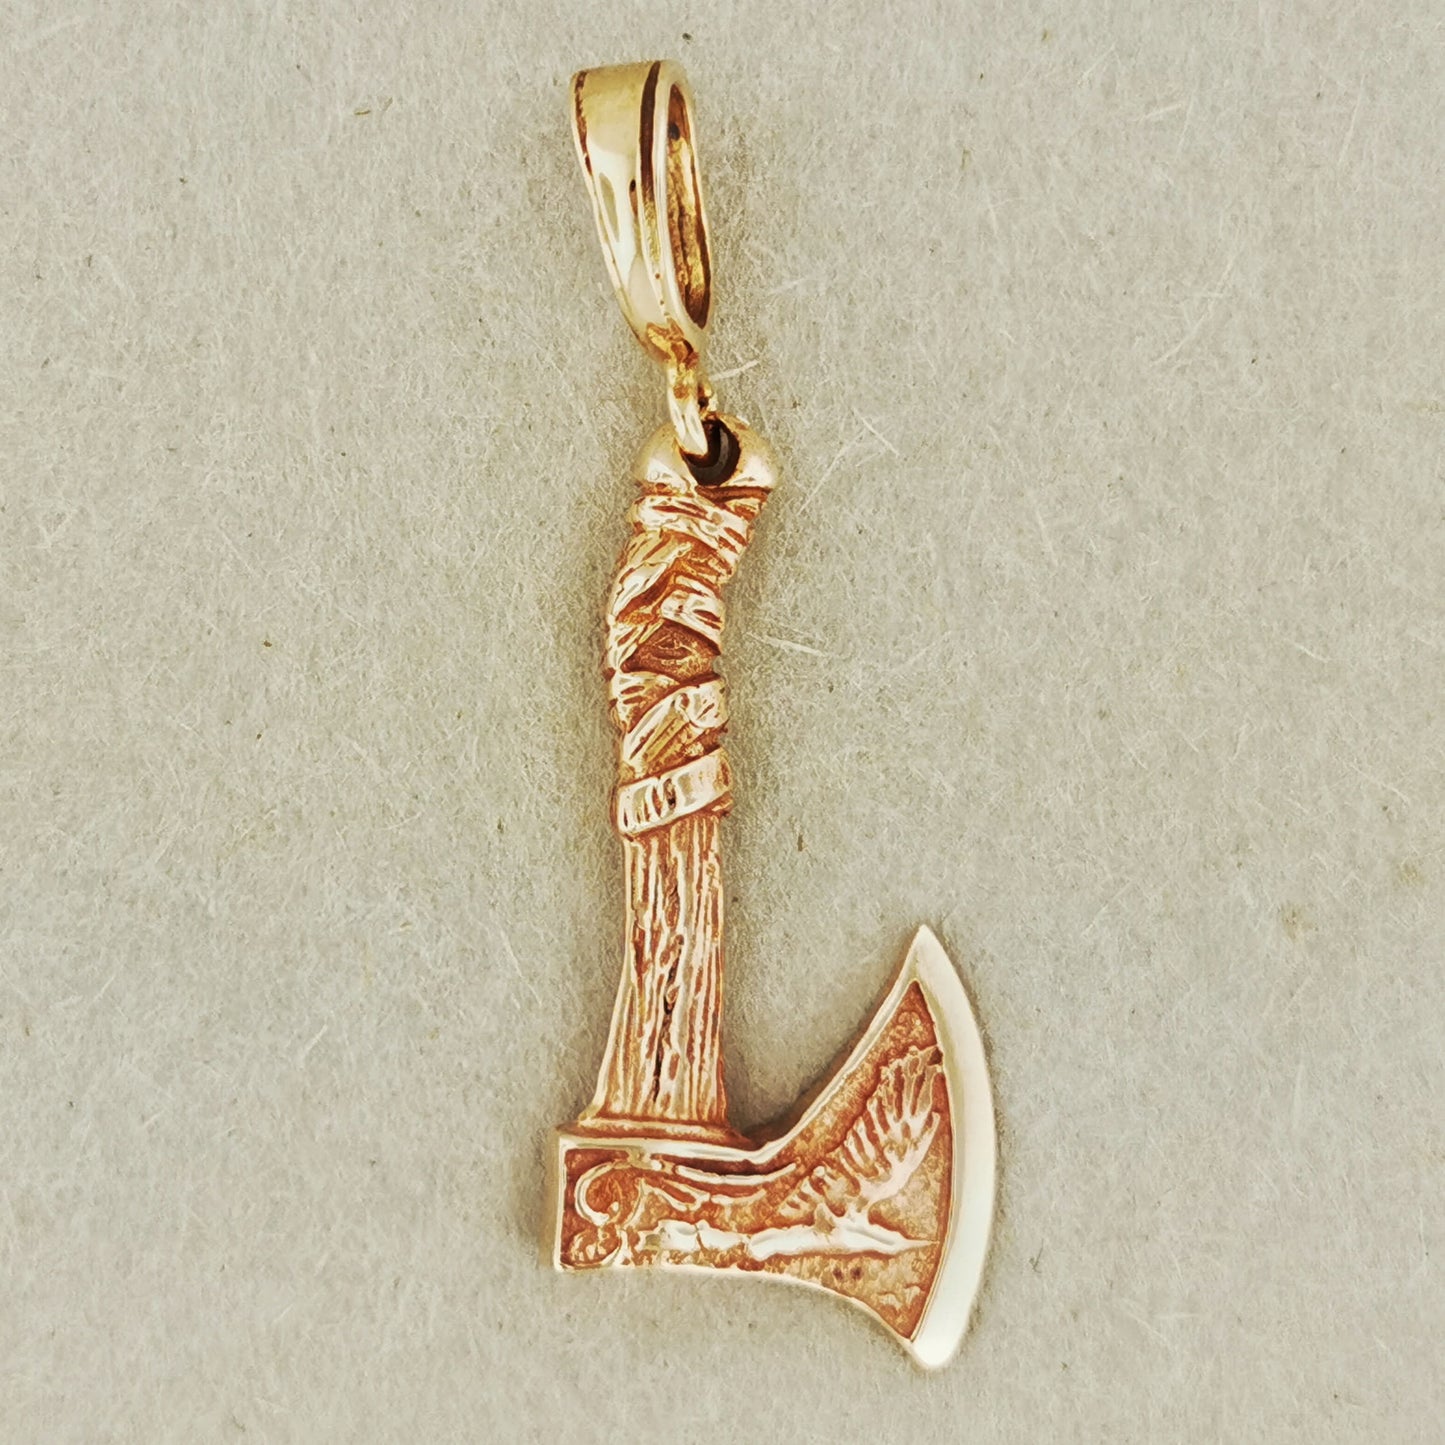 Small Axe Pendant in Sterling Silver or Antique Bronze